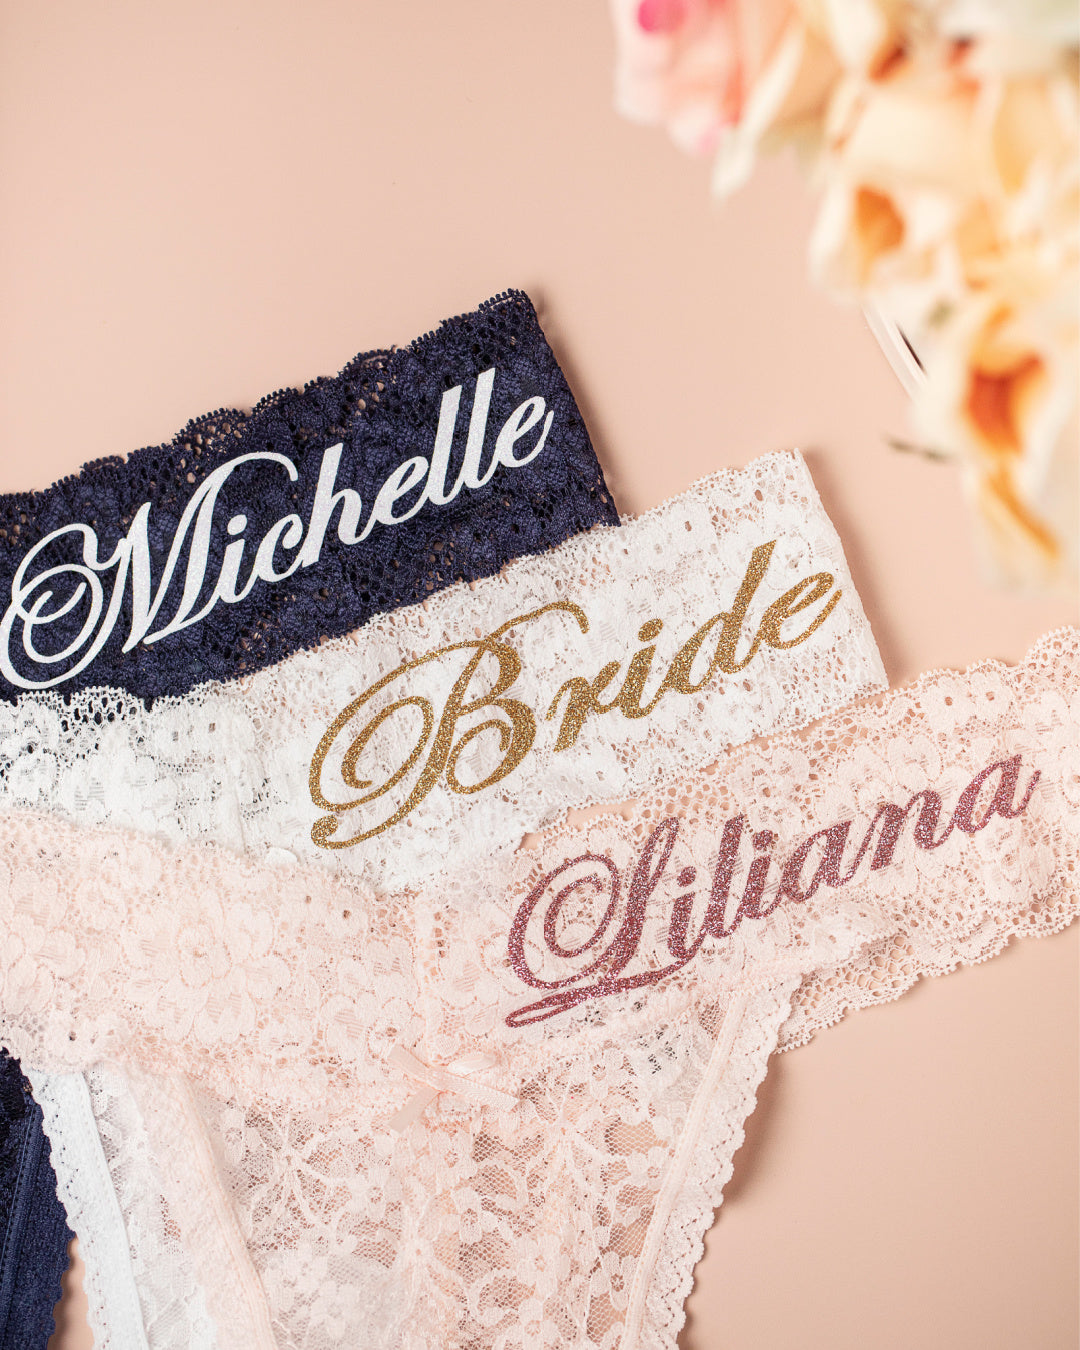 Personalized Gift for Her Bride Panties Lace Wedding Underwear Bridal  Shower Gift Bachelorette Personalized Honeymoon Christmas Gift 